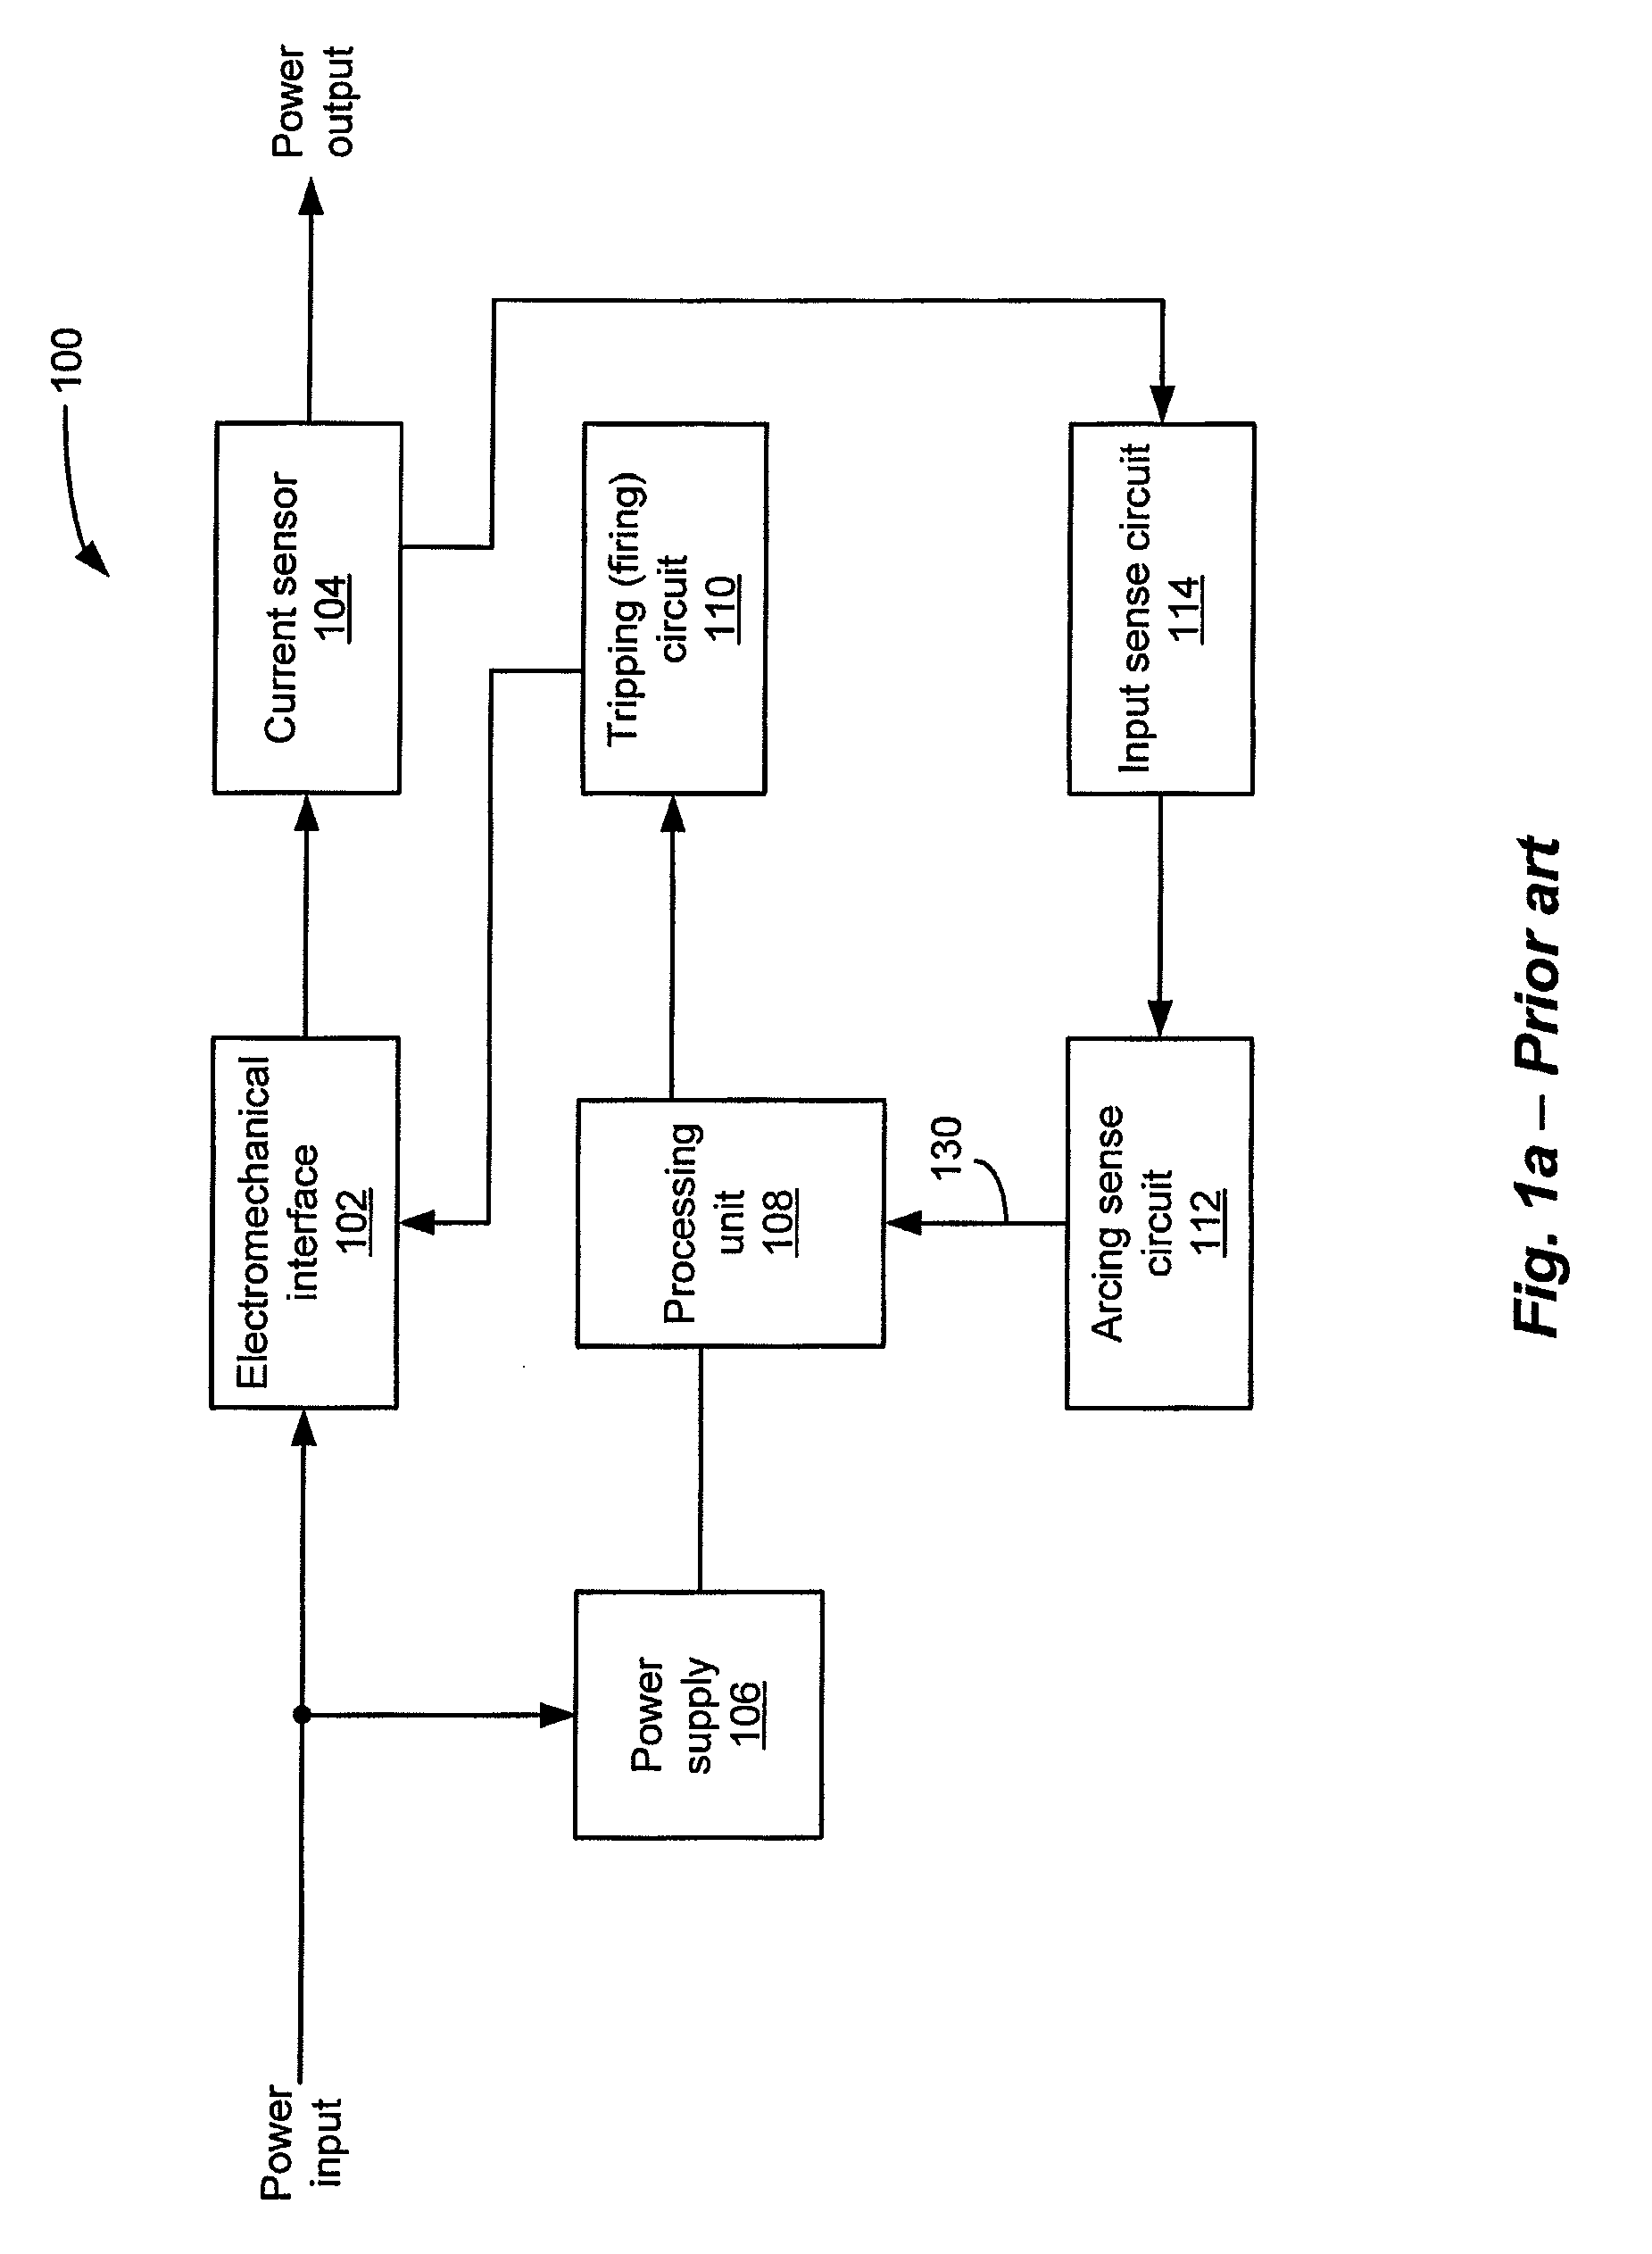 Arc fault detection apparatus employing a comparator with a continuously variable threshold